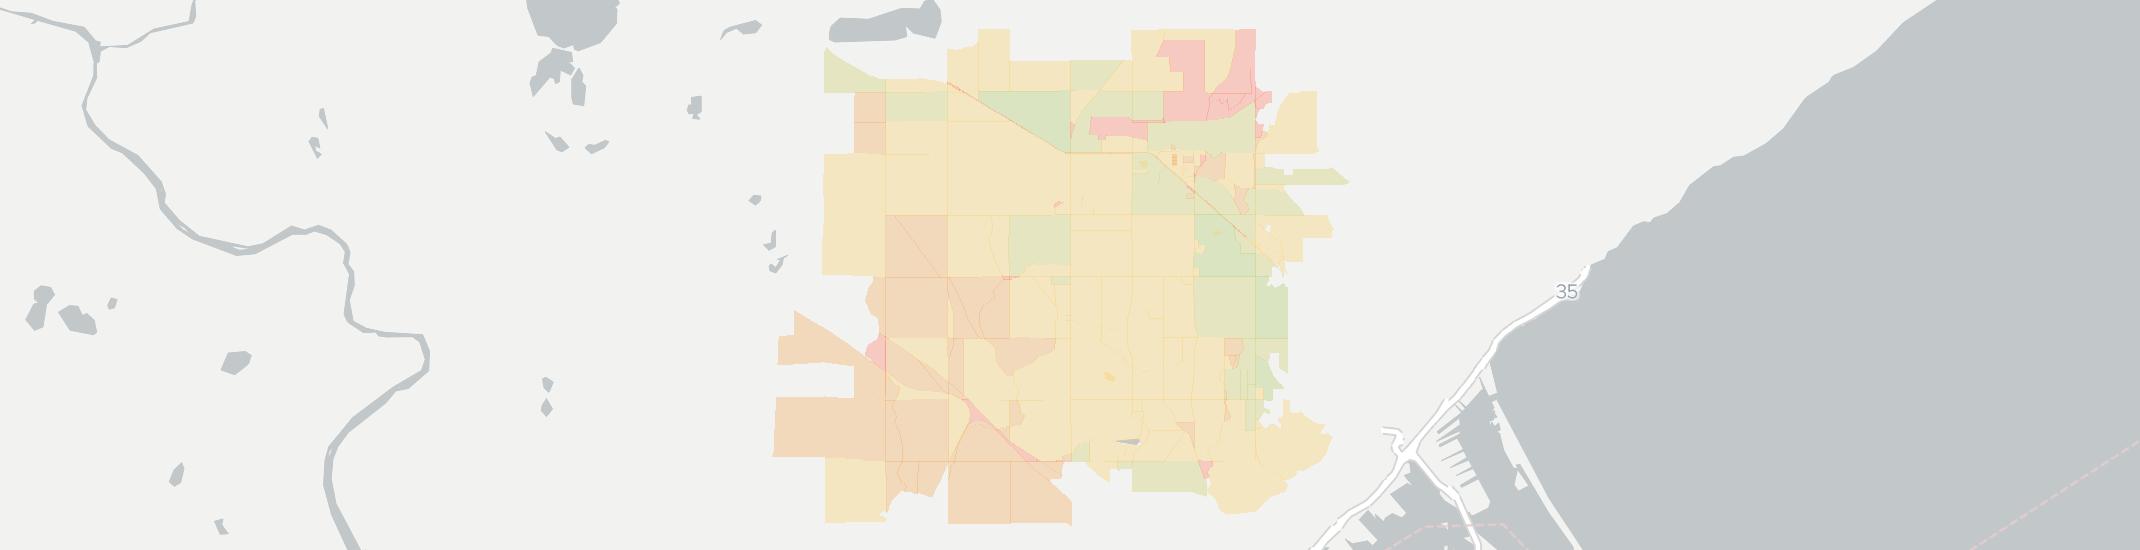 Hermantown Internet Competition Map. Click for interactive map.